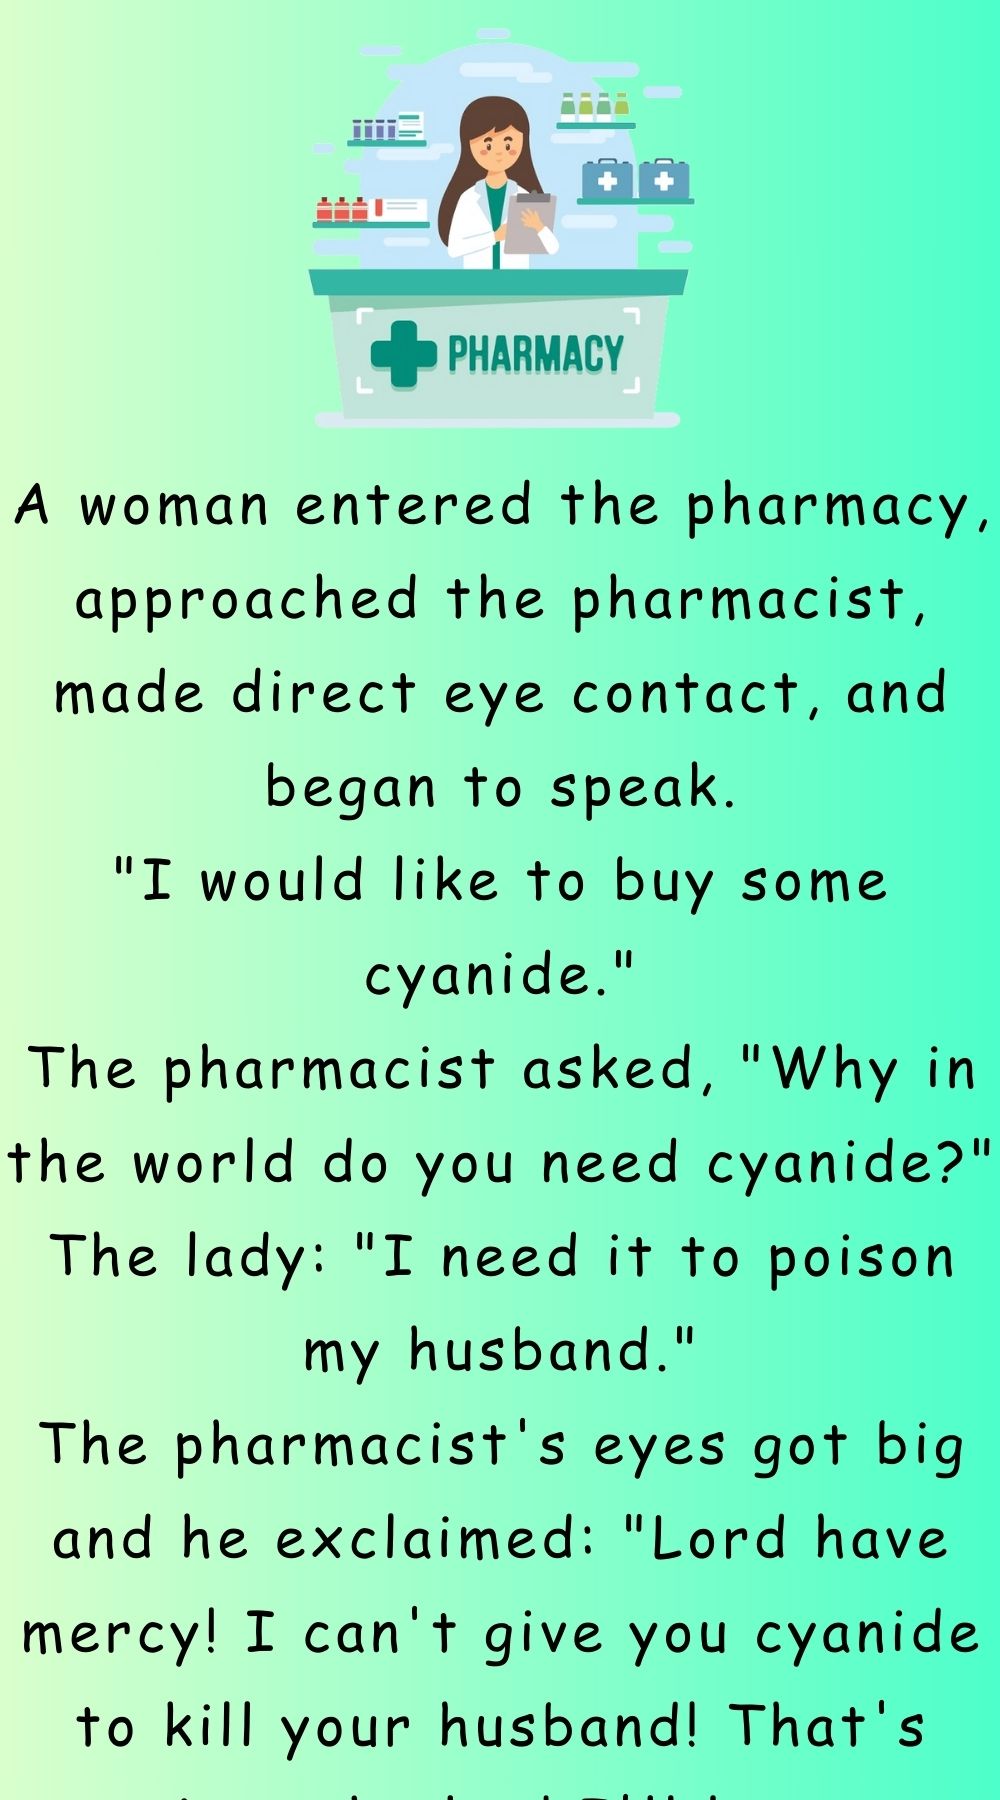 A woman entered the pharmacy